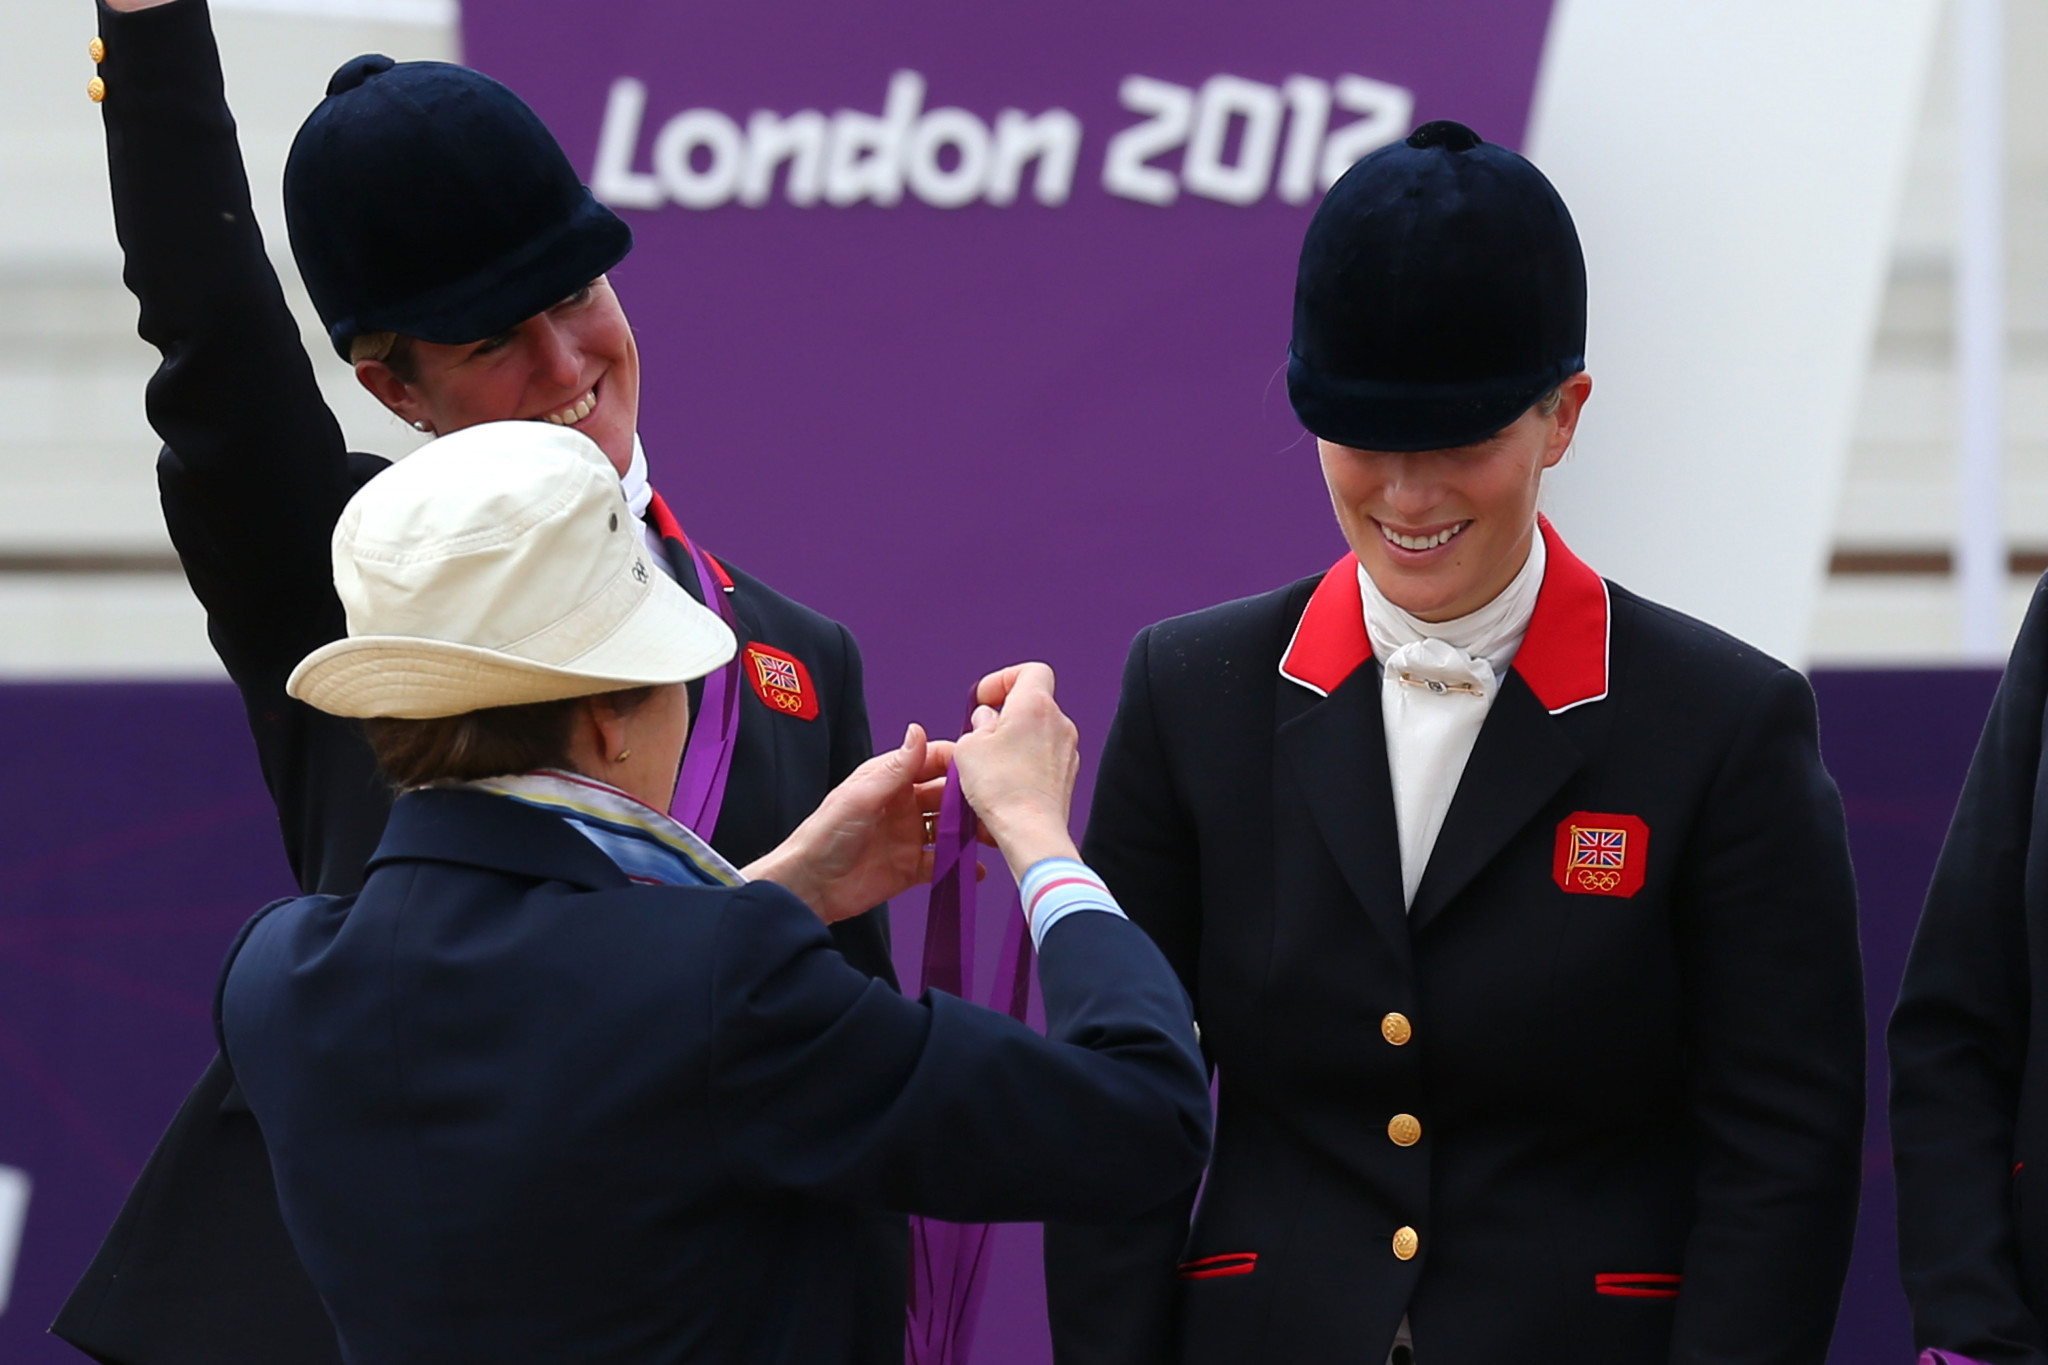 Zara Tindall's silver at London 2012 was presented to her by her mother Princess Anne ©Getty Images